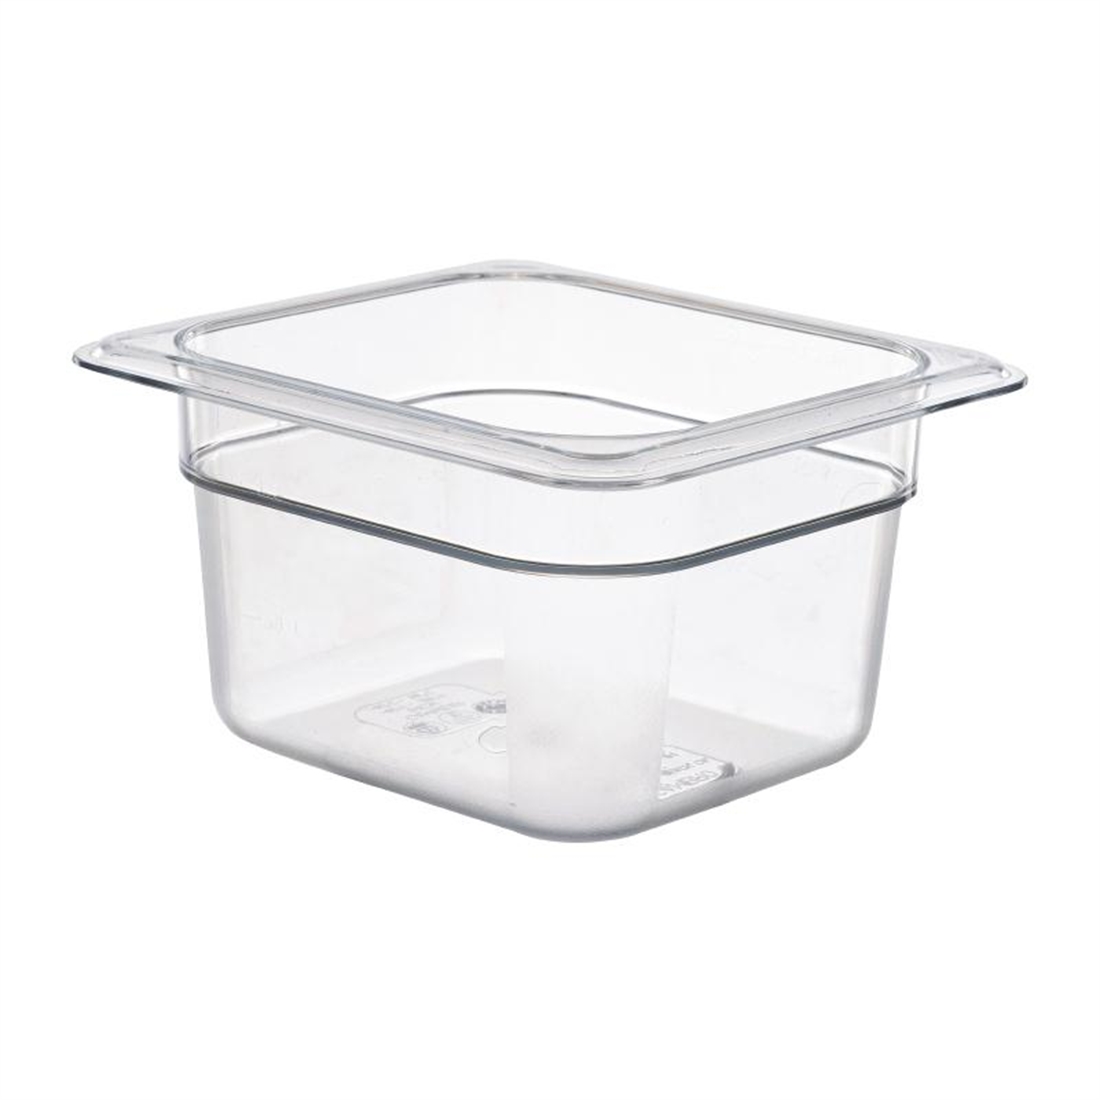 Cambro Polycarbonate 1/6 Gastronorm Pan 100mm